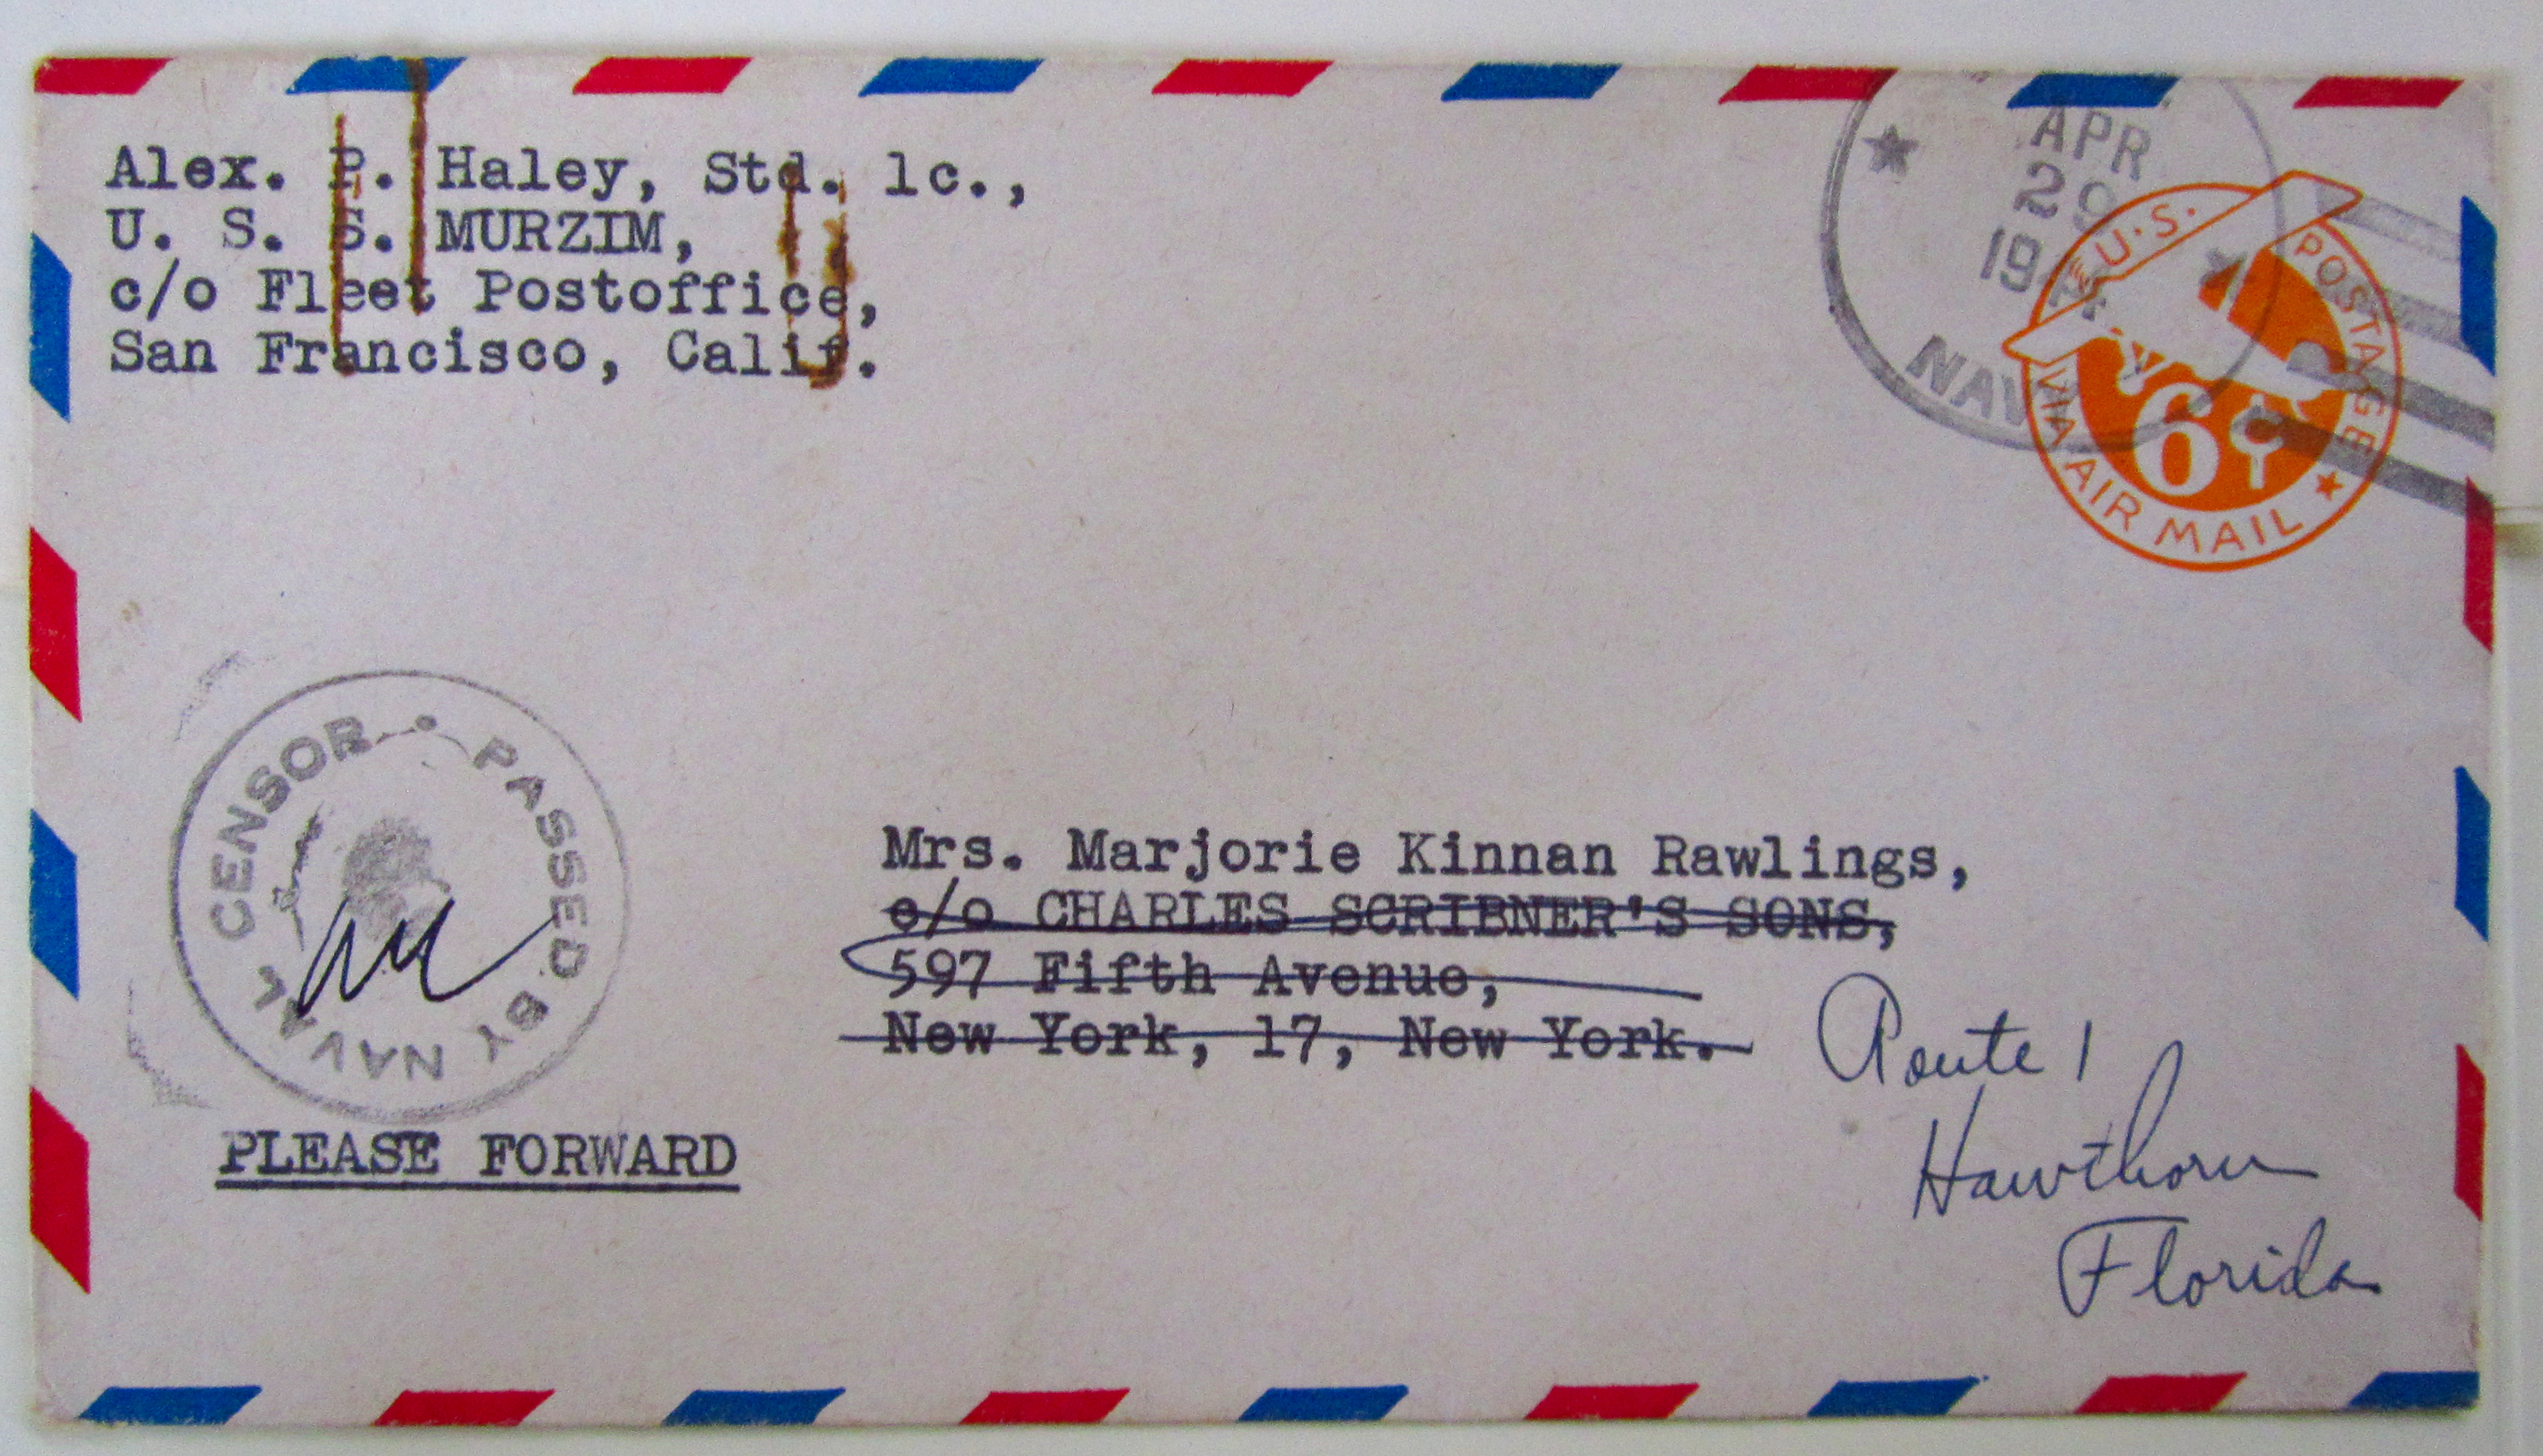 Envelope containing a fan letter from Alex P. Haley to Marjorie Kinnan Rawlings, 1944.